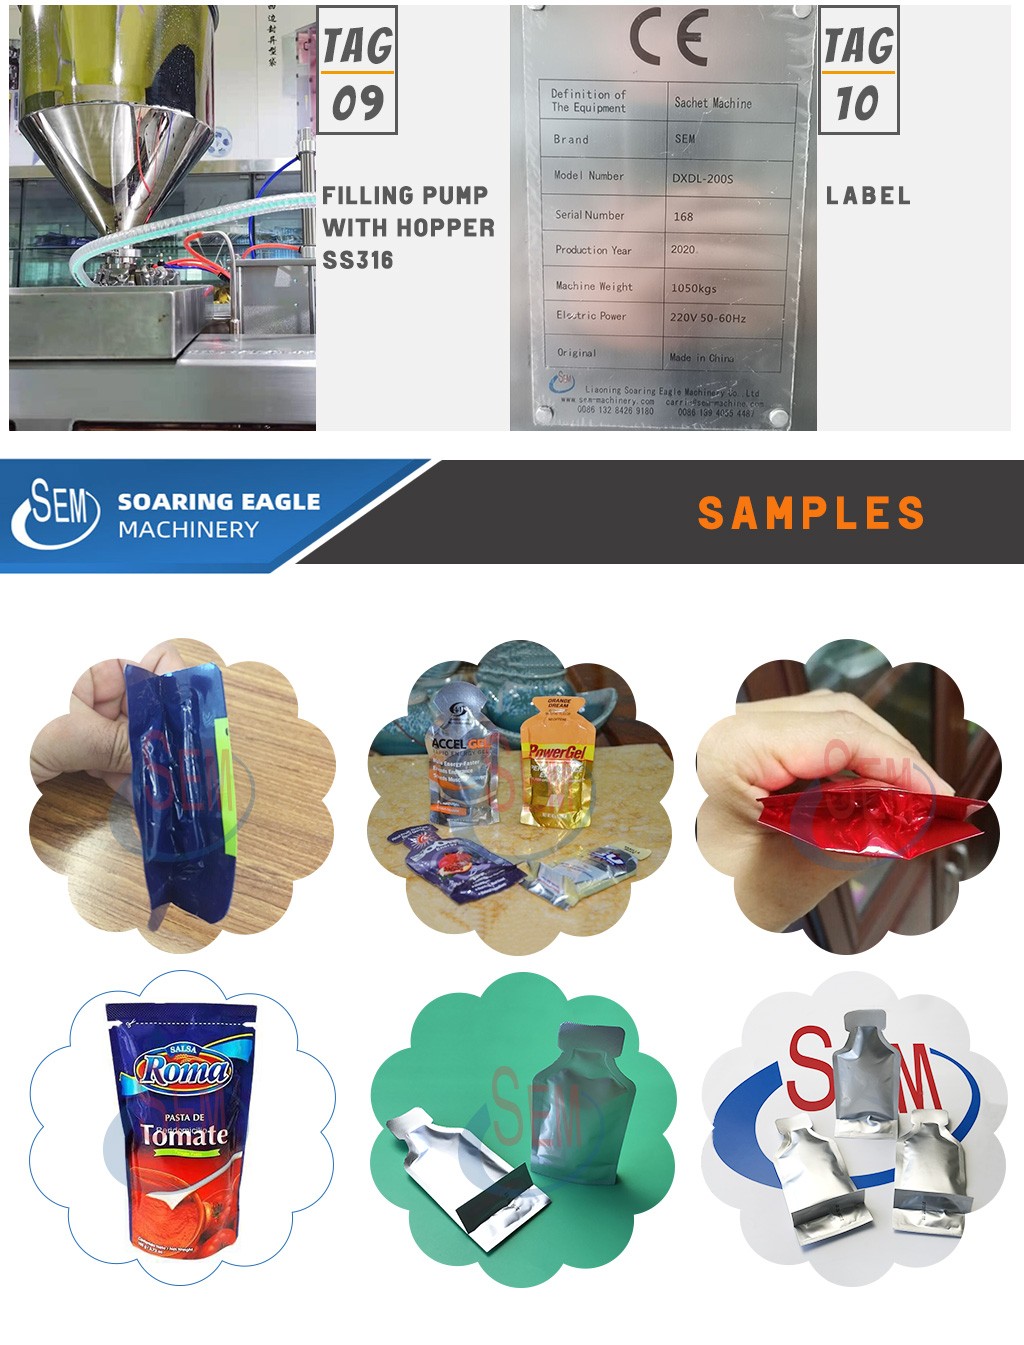 Automatic stand up pouch sachet packing machine for health drinking pharma